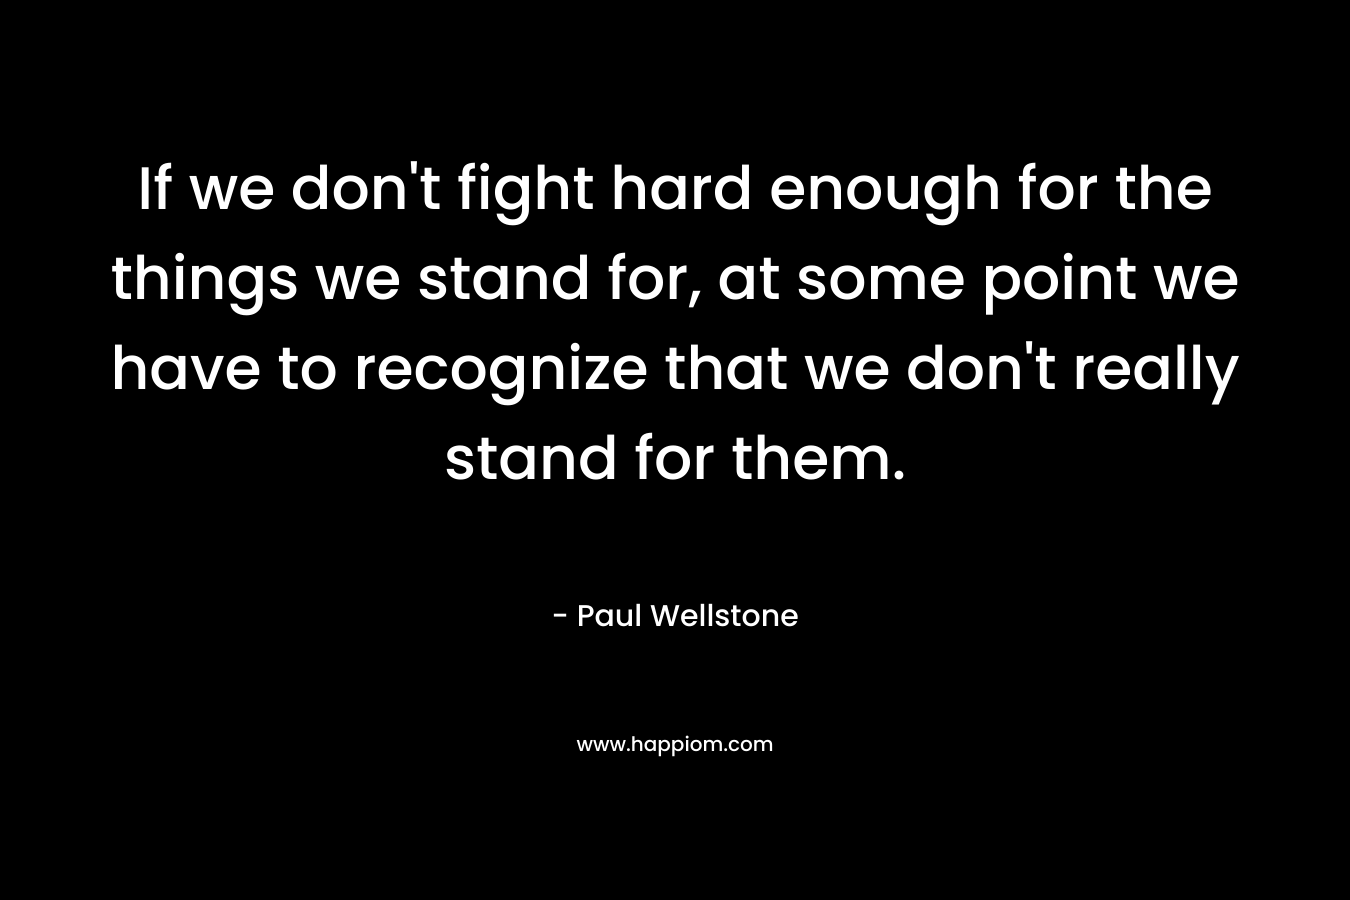 If we don't fight hard enough for the things we stand for, at some point we have to recognize that we don't really stand for them.